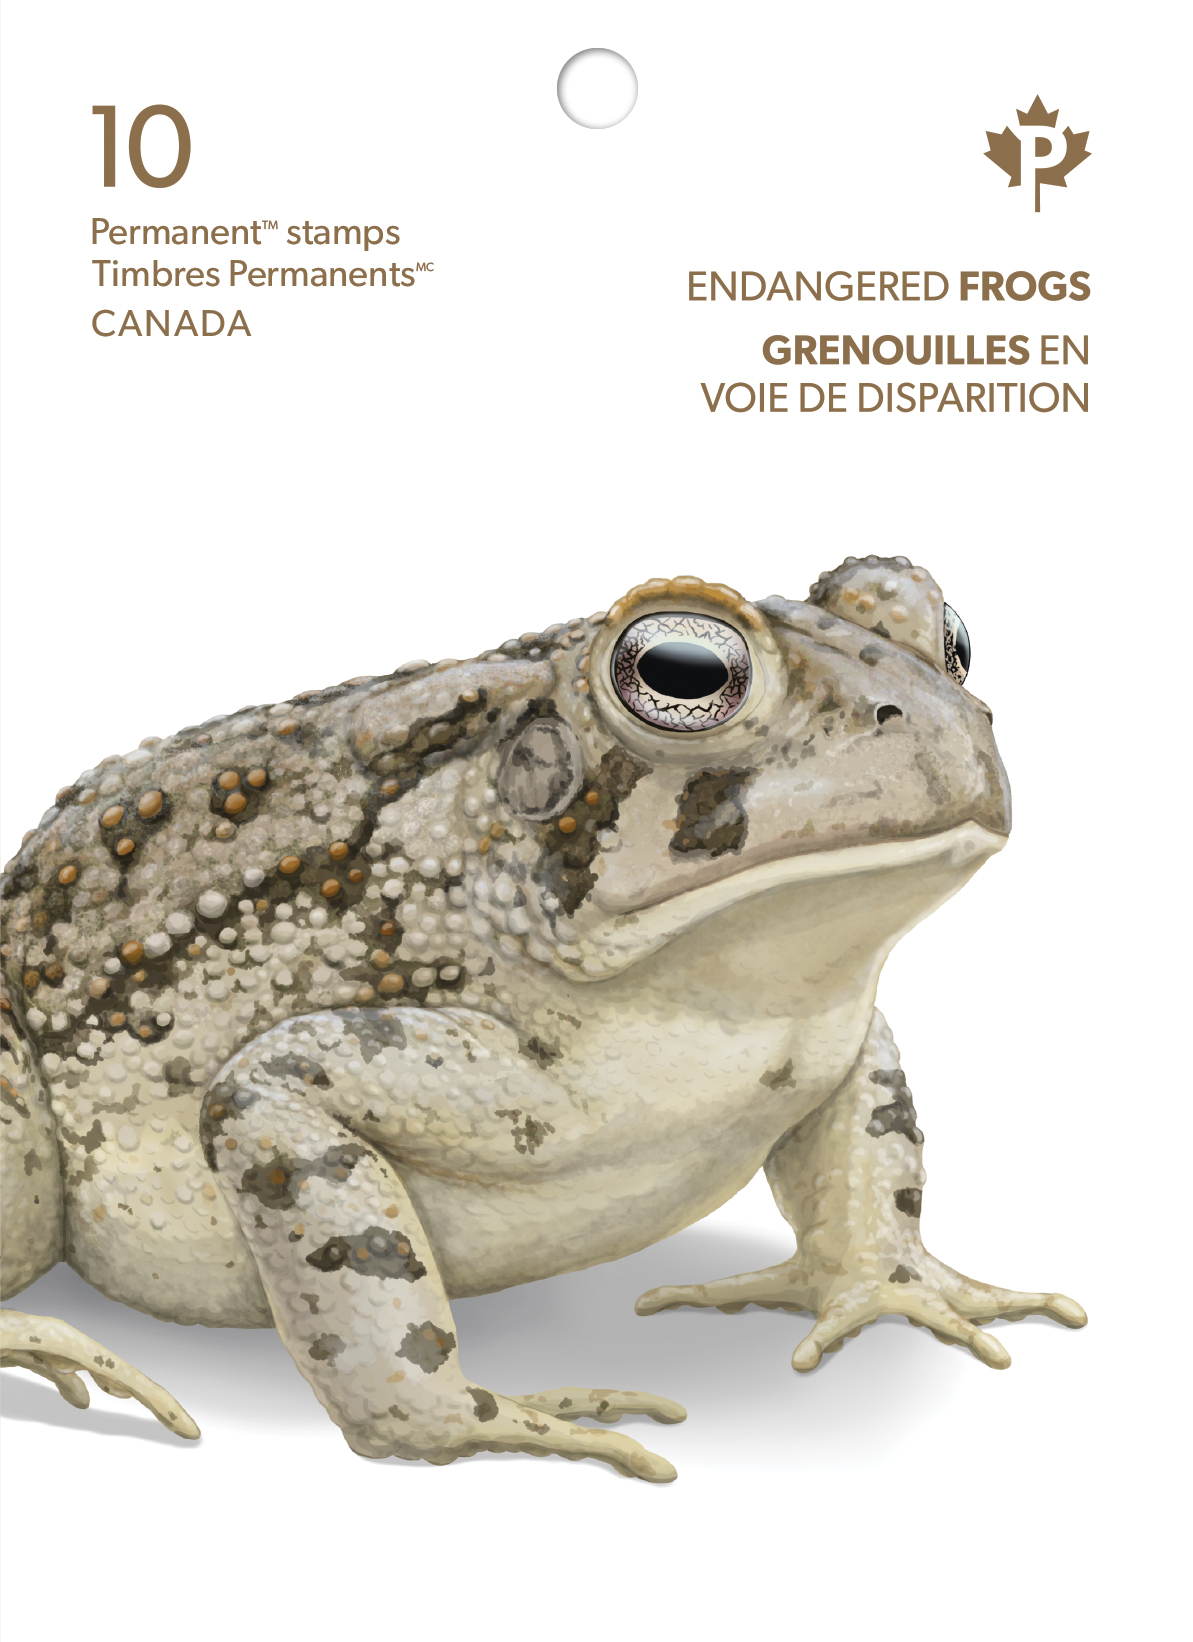 stamp booklet front cover illustration of Fowler's Toad